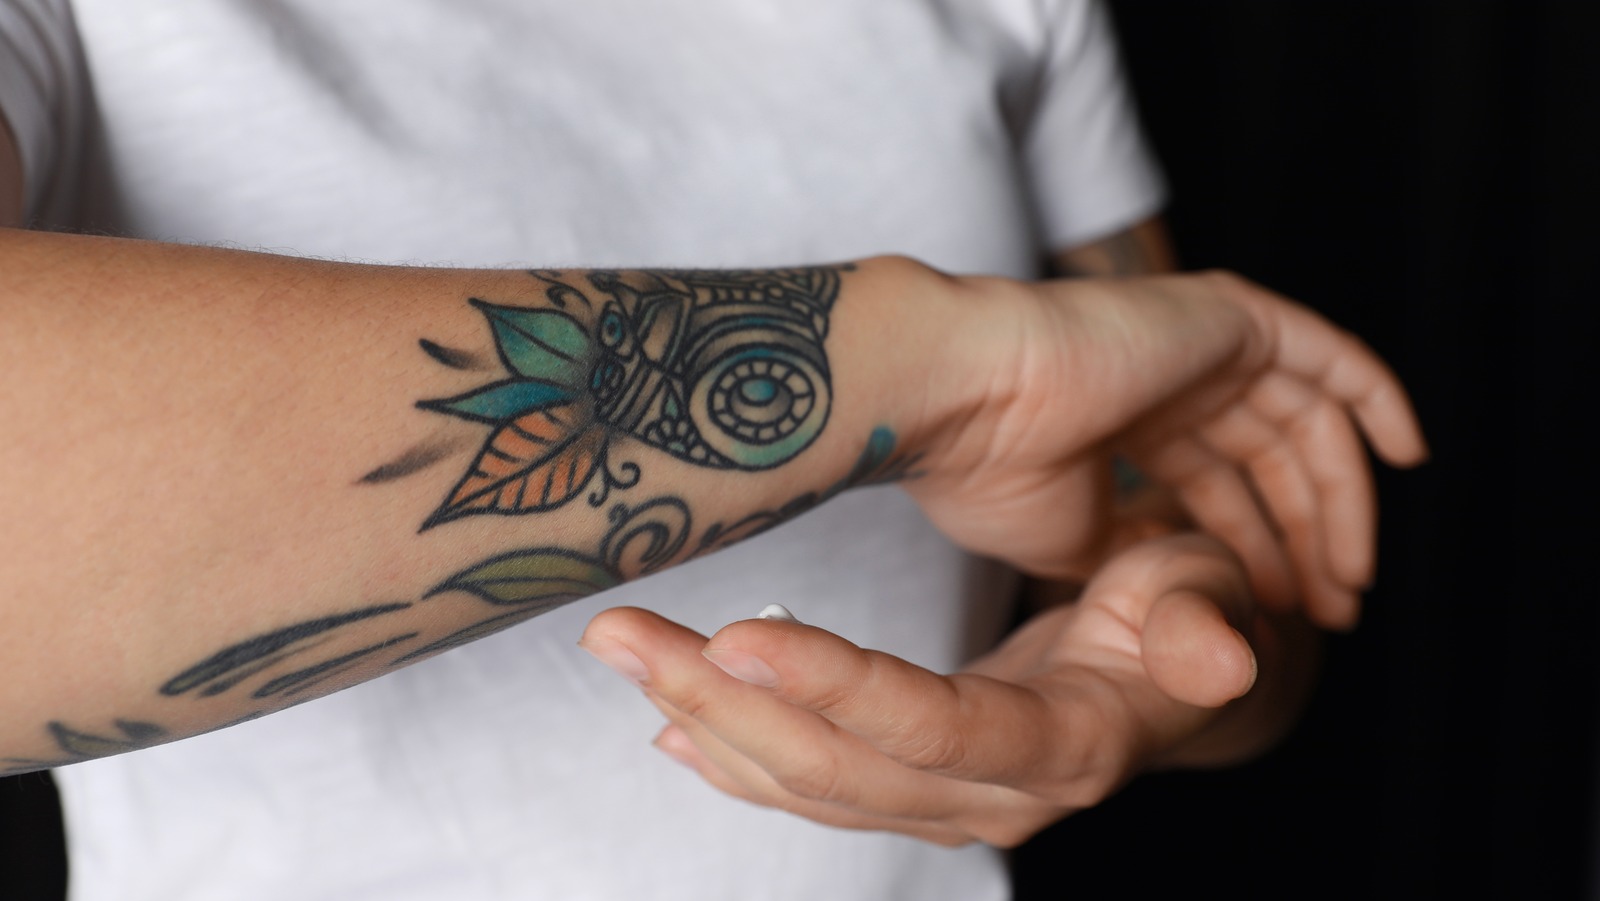 Tattoo health warning for people with weakened immune systems  Tattoos   The Guardian